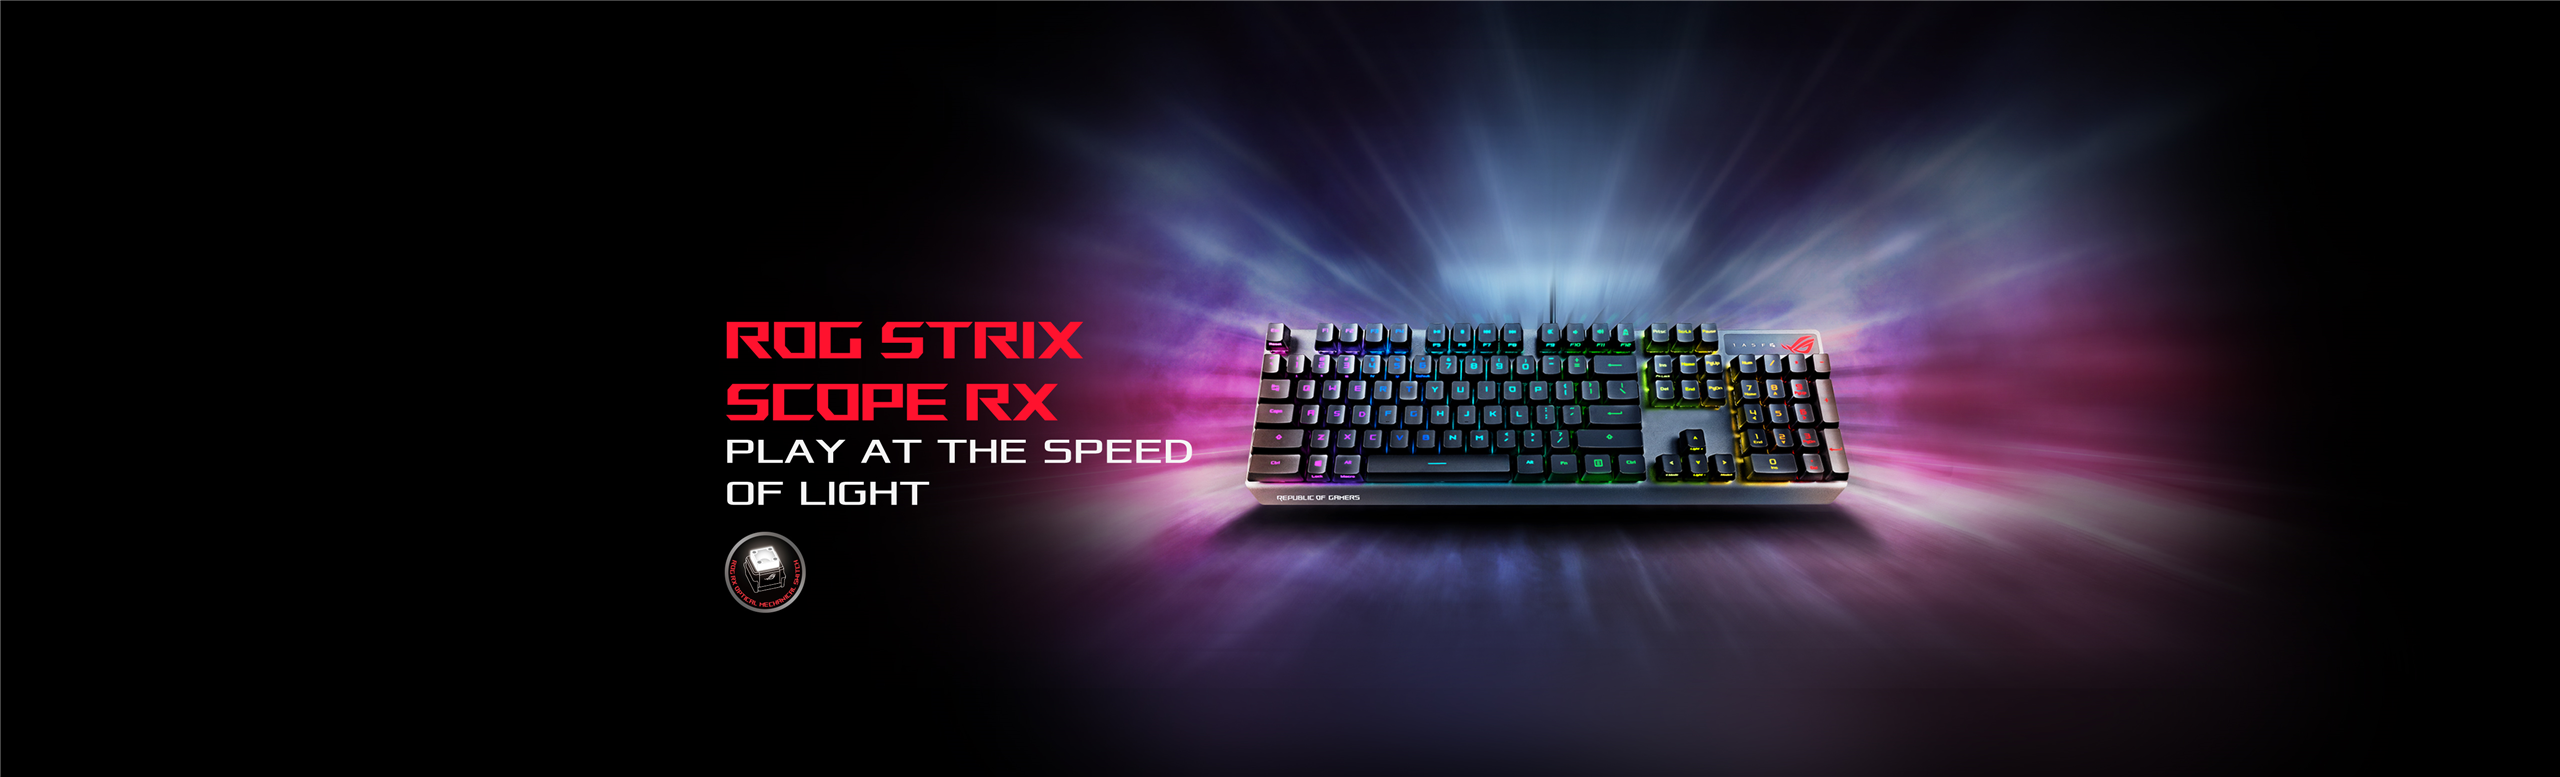 ROG Strix Scope RX Keyboard product photo with a RX switch icon